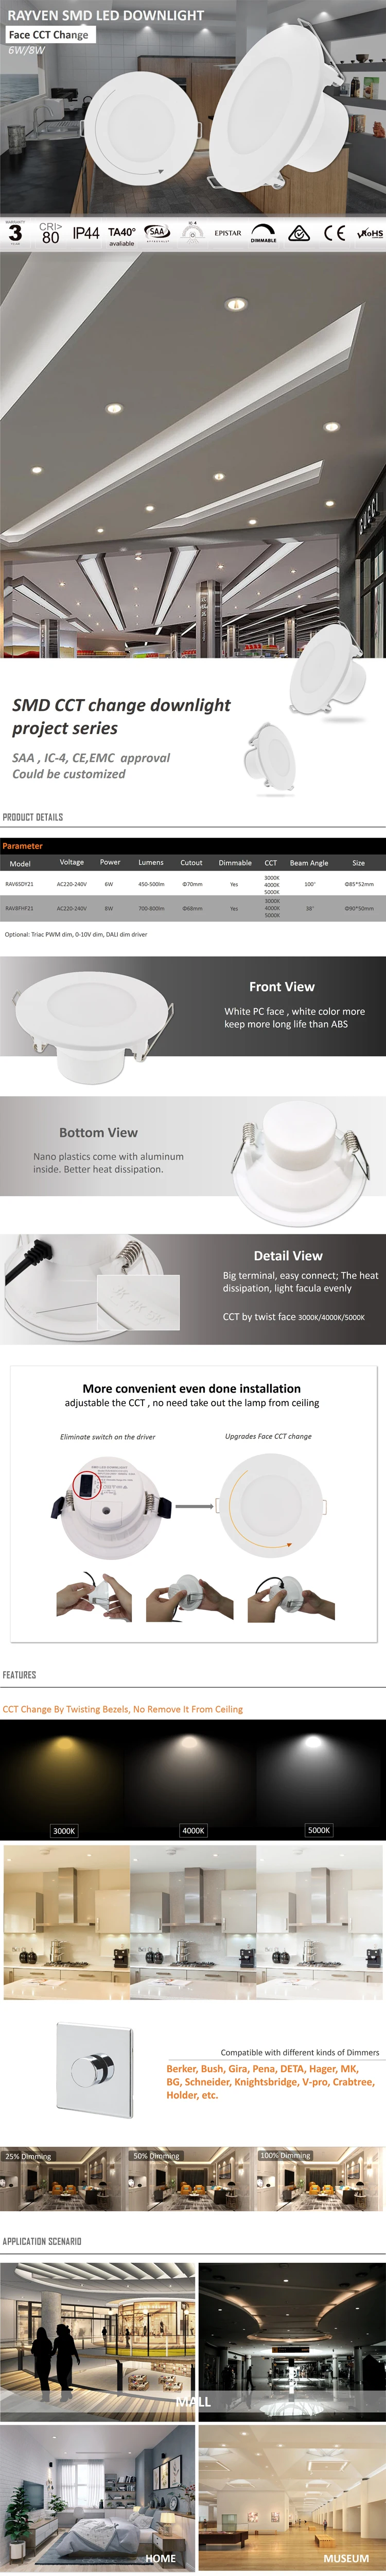 Face change cct color adjustable 6 CCT led downlight prices